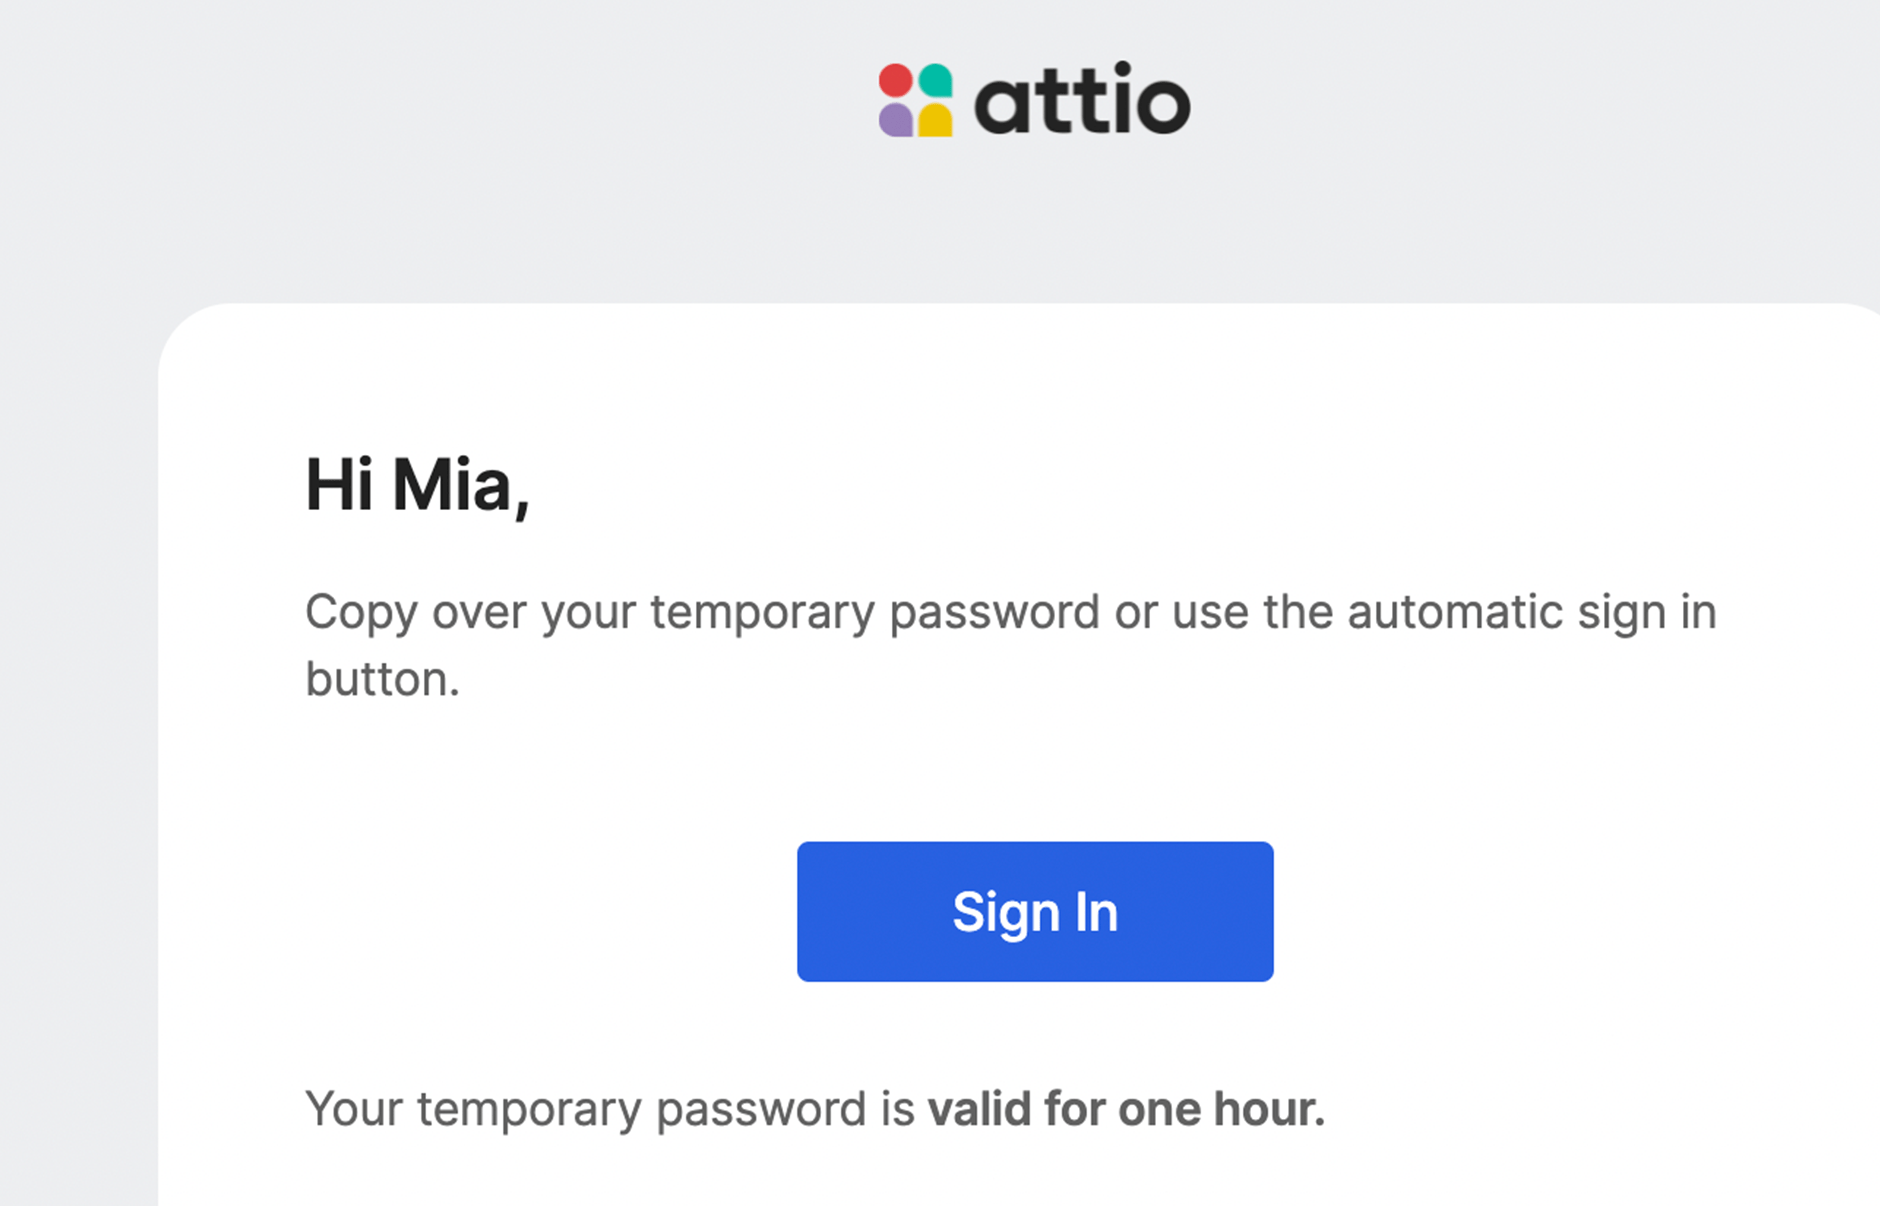 A screenshot of an automated email message providing a temporary password for Attio. A blue Sign In button is shown, which is an even easier option for signing in without using aa Google account.